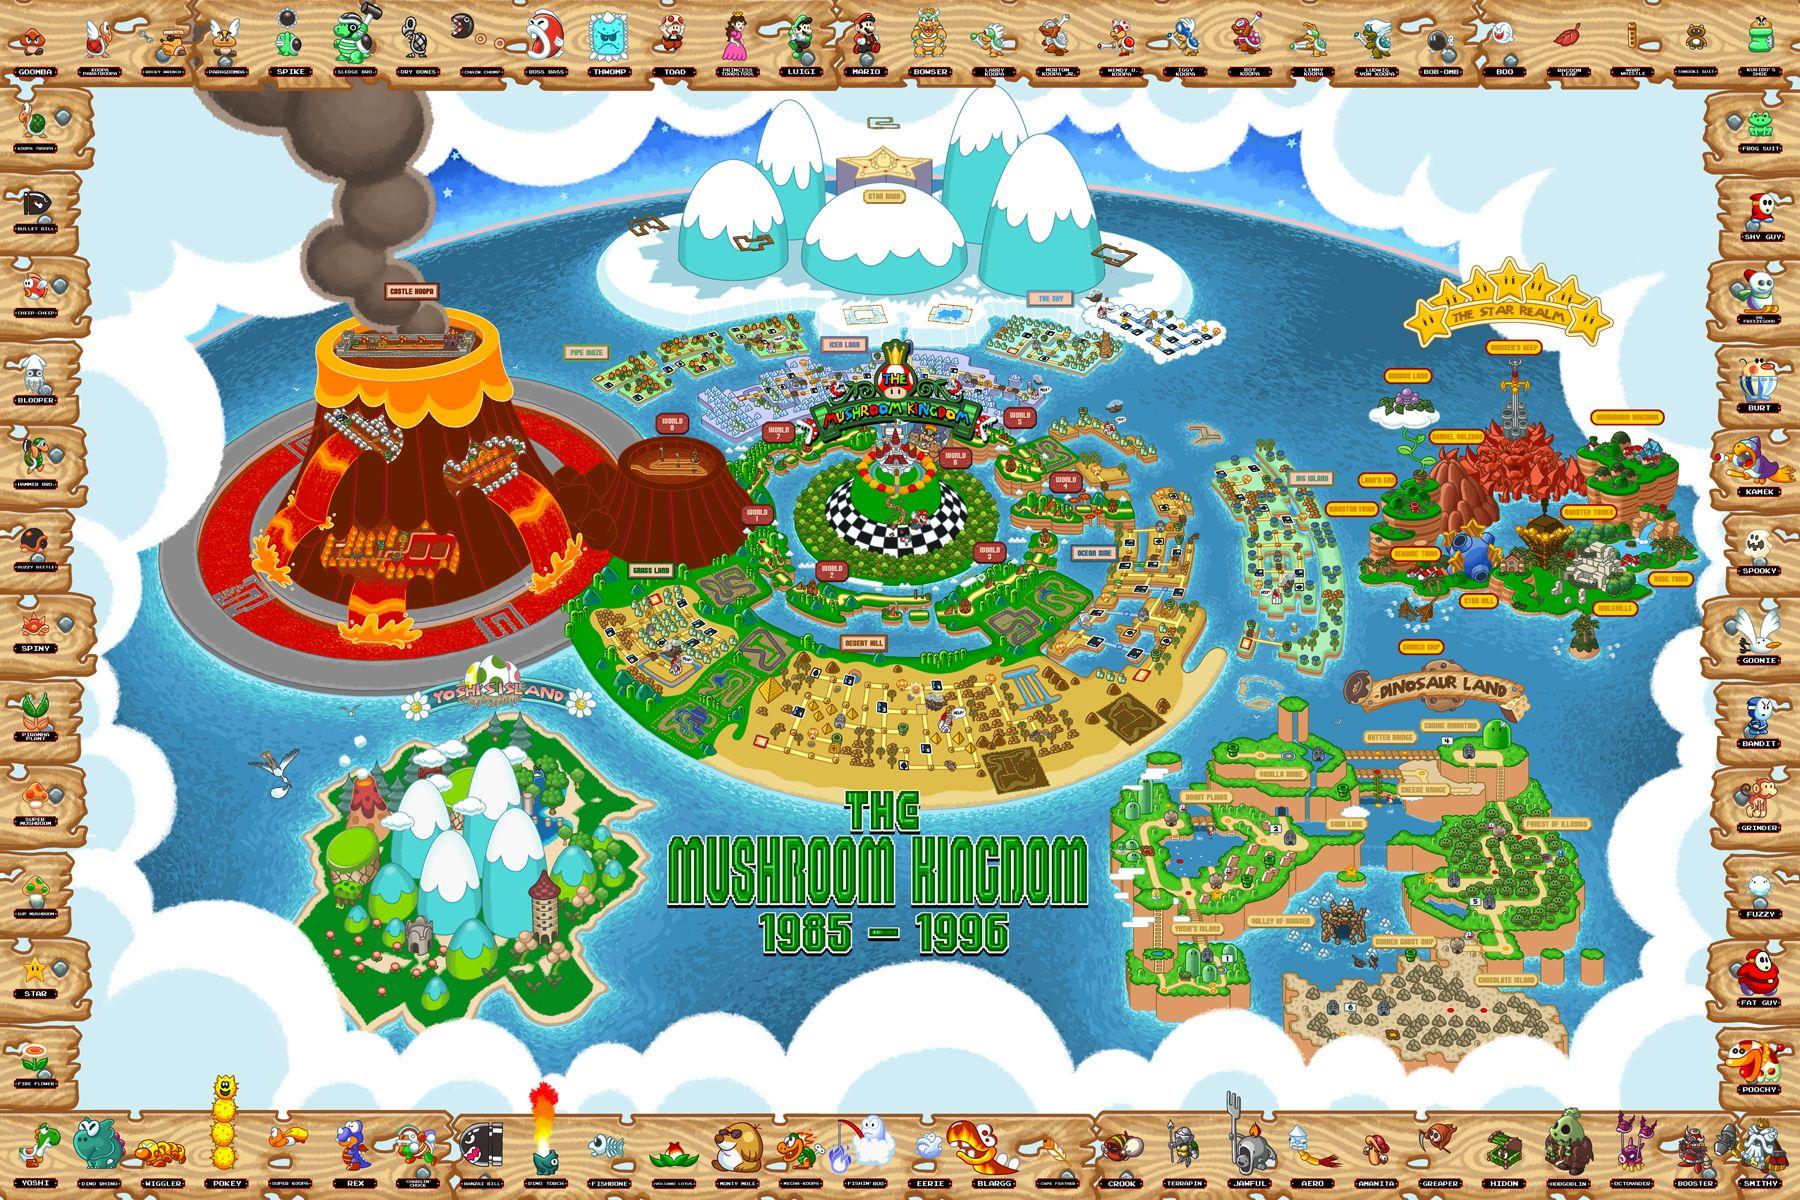 The ultimate map to the entire Mushroom Kingdom